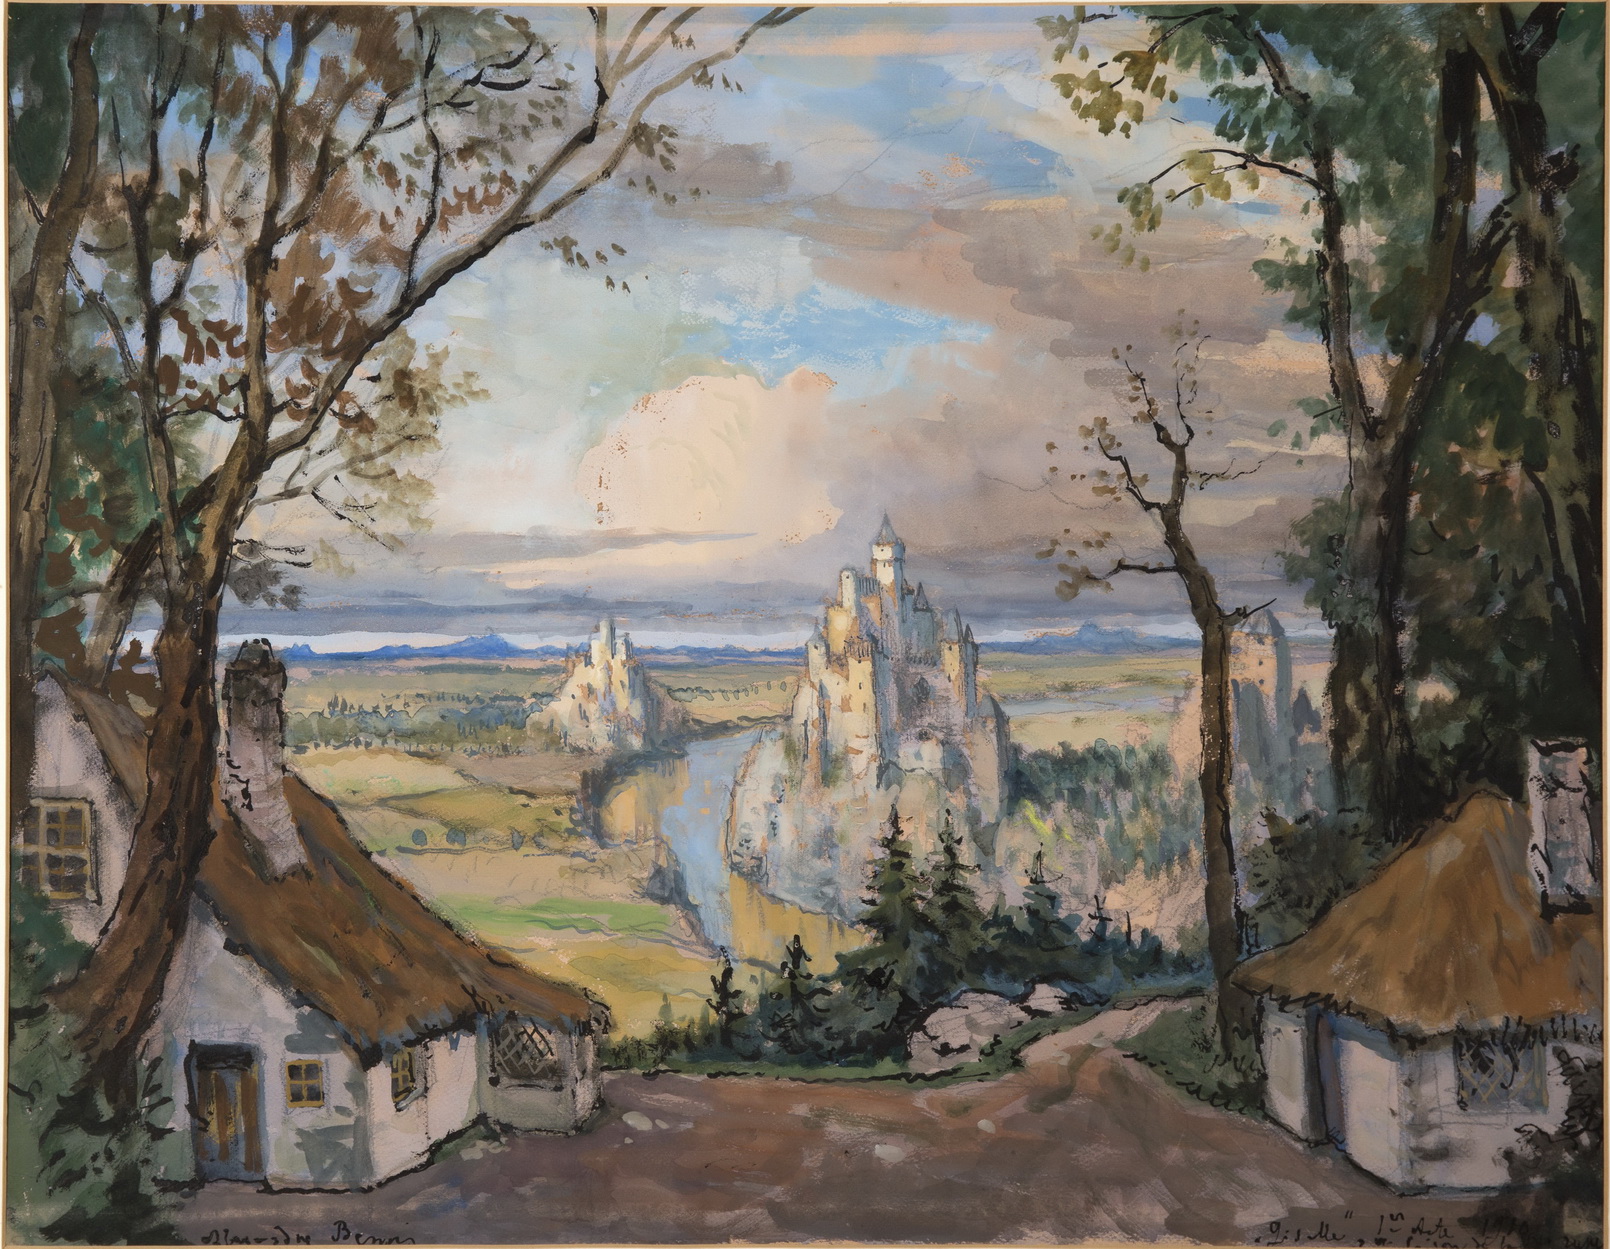 Exhibition “Alexander Benois’s Theater and Contemporary Artists”